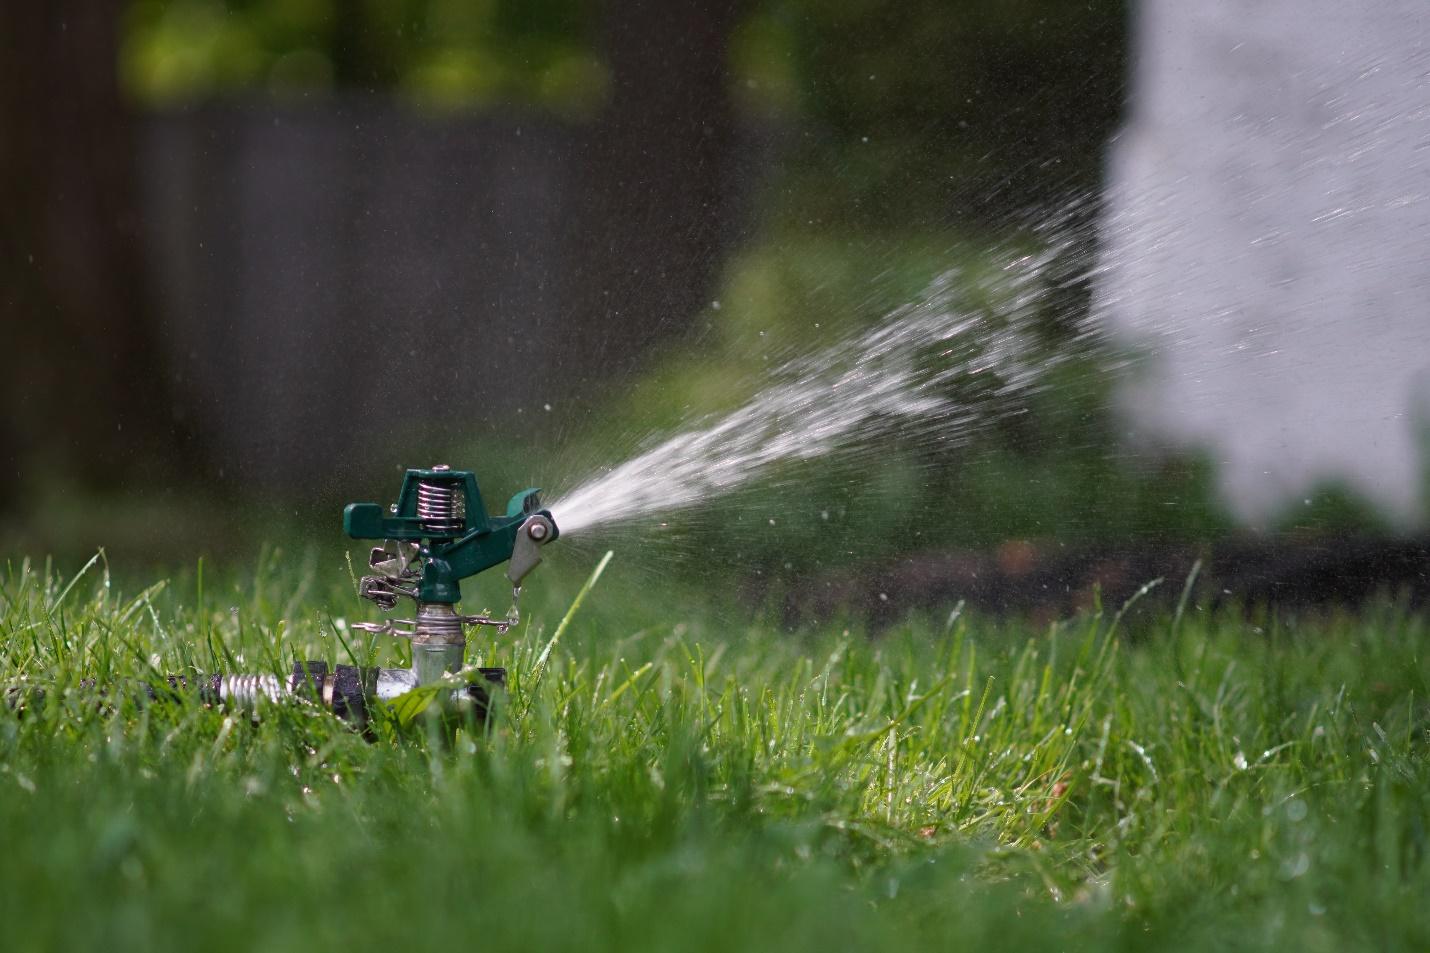 A sprinkler spraying water on grass

Description automatically generated